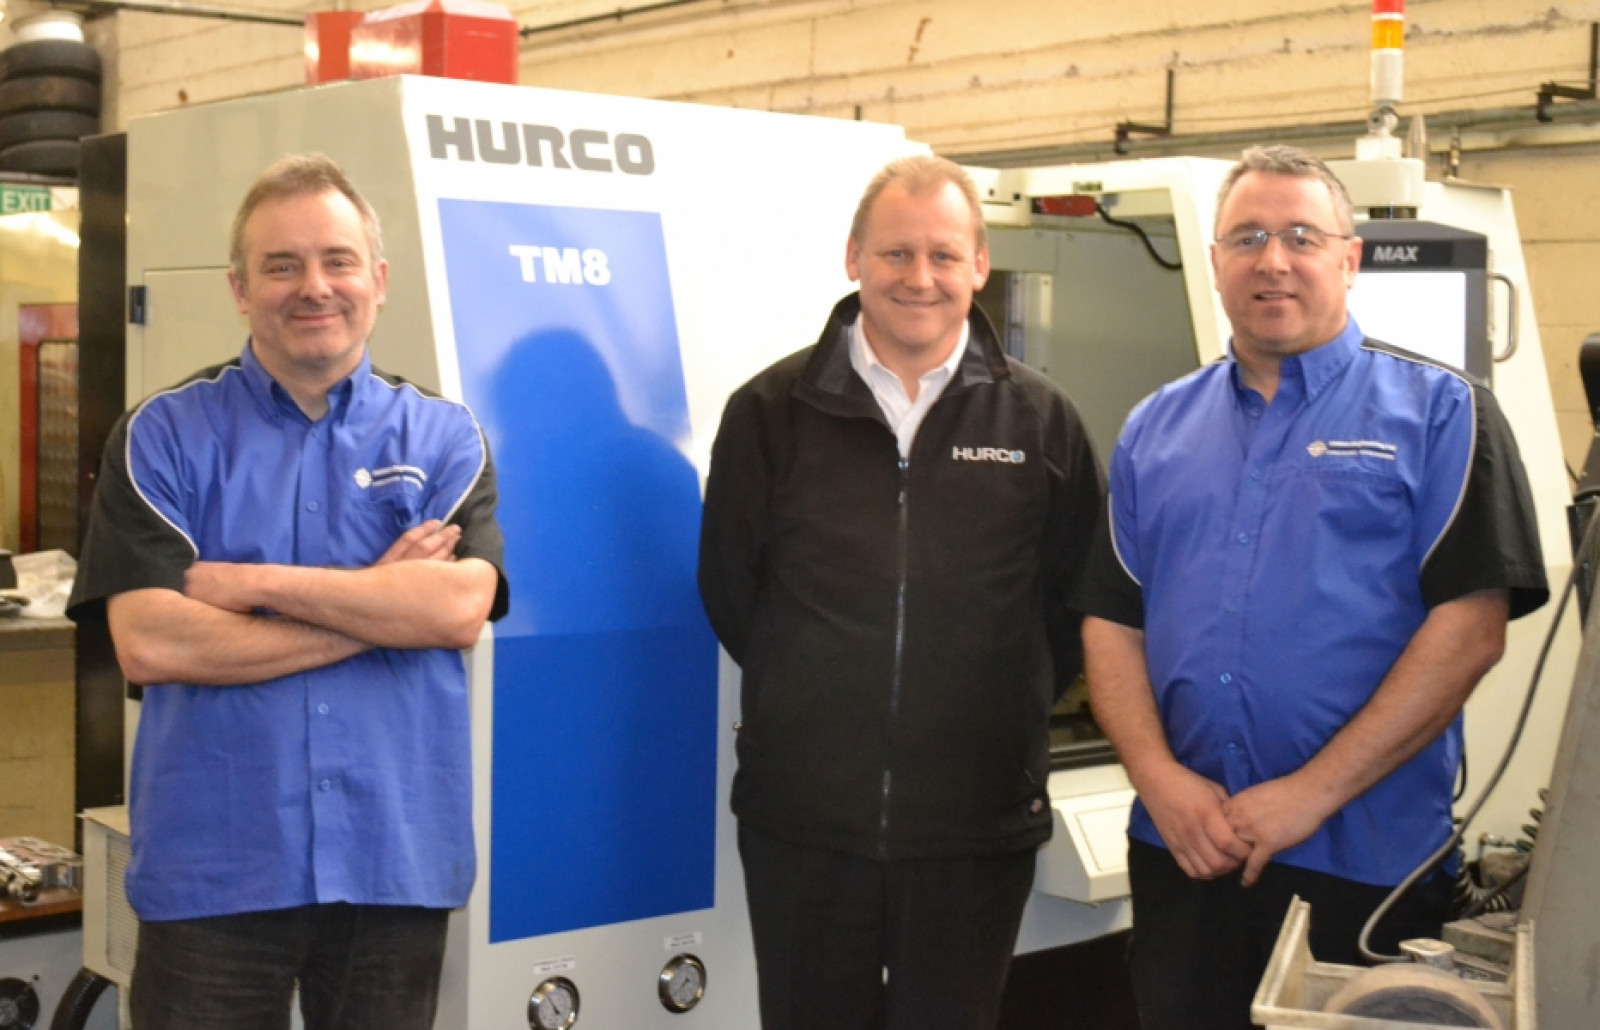 Helston Invests in Hurco VM20i Machining Centre